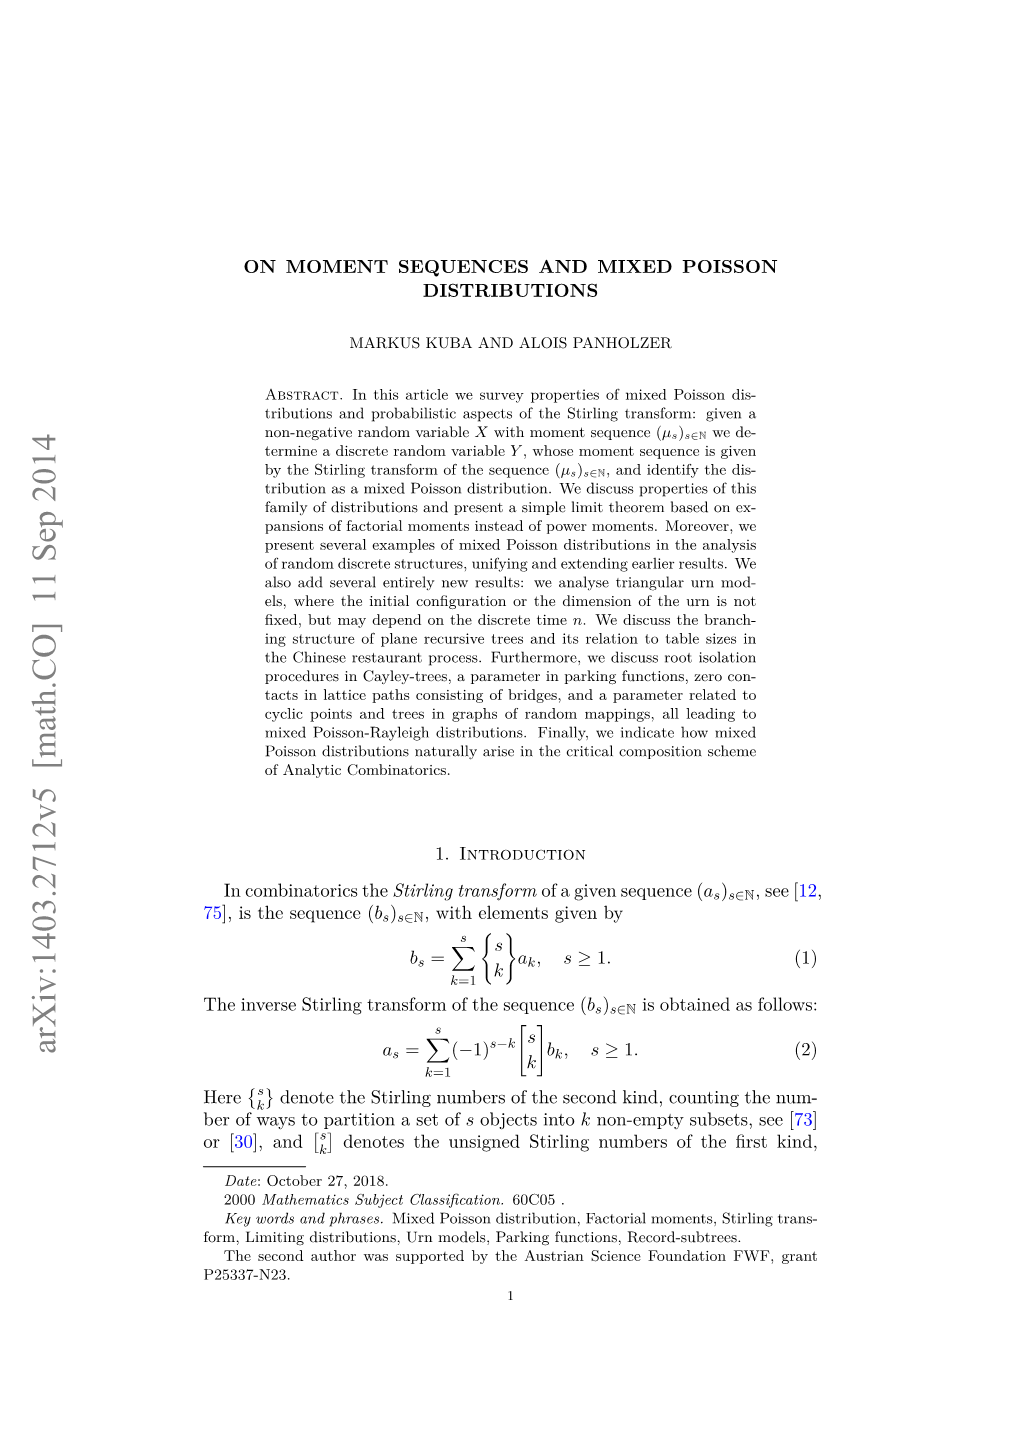 On Moment Sequences and Mixed Poisson Distributions